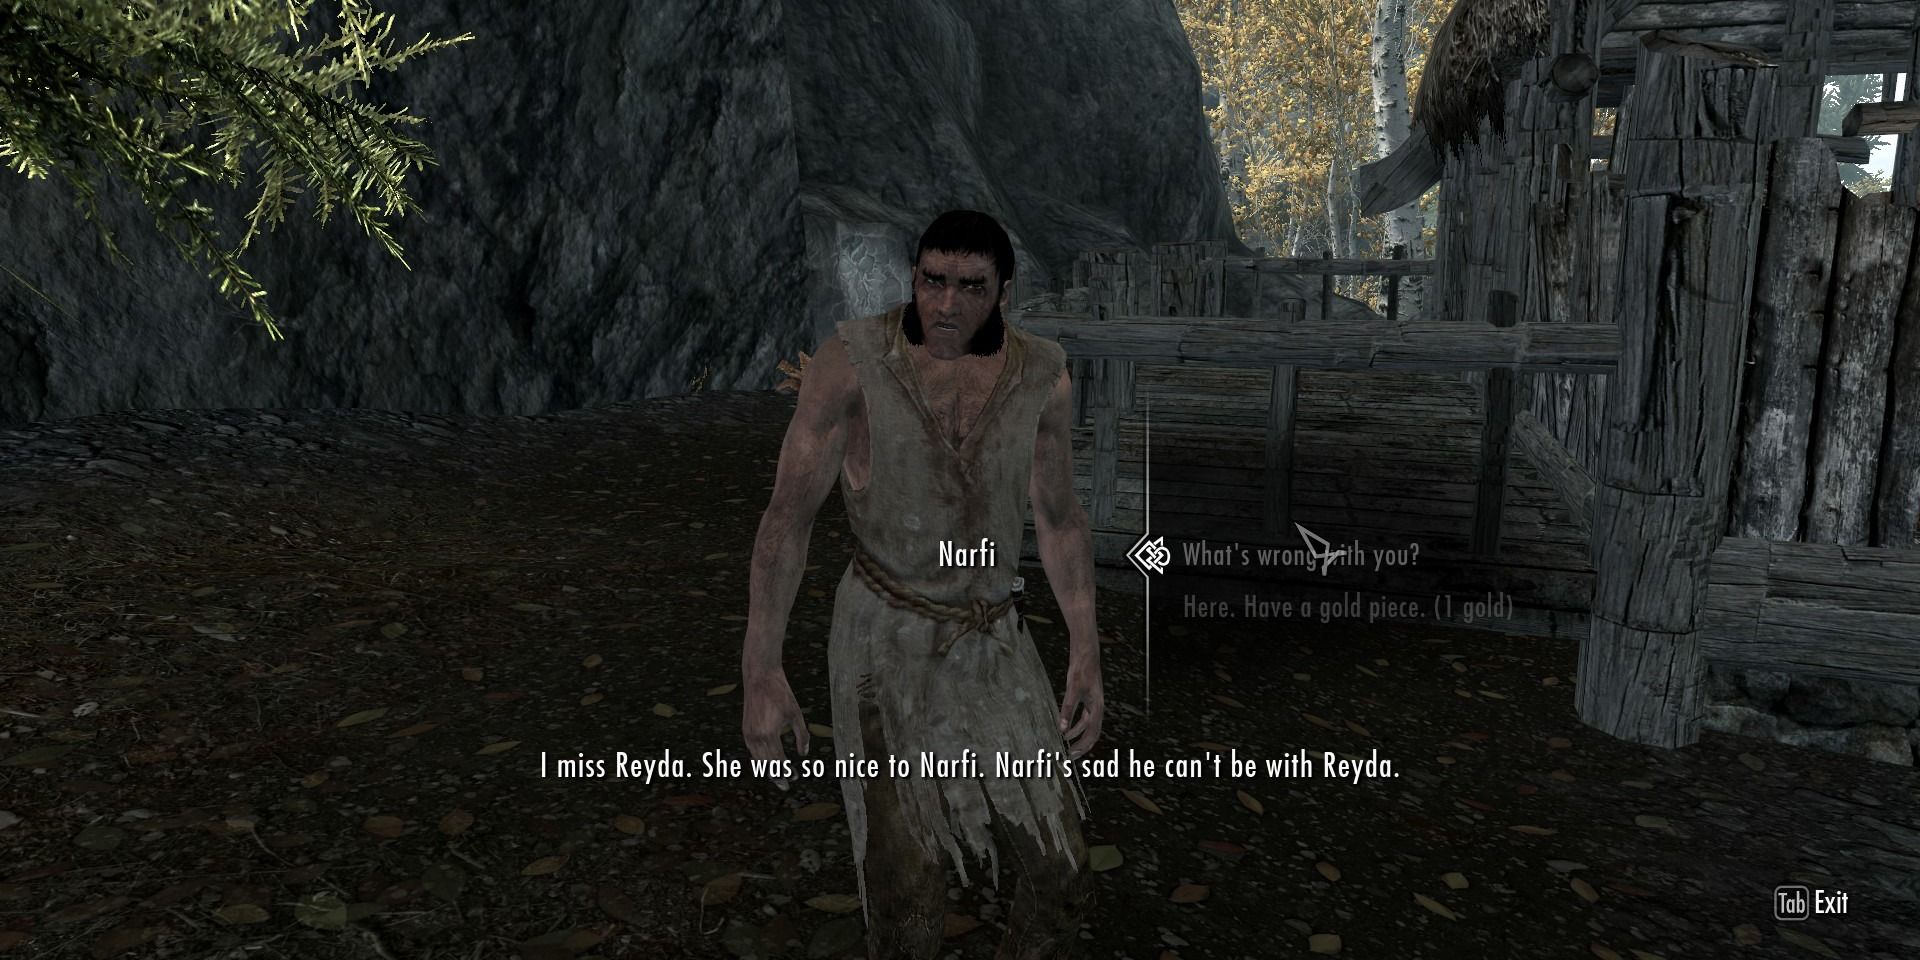 An image of Narfi speaking to the player in Skyrim, describing how he misses his sister Reyda.